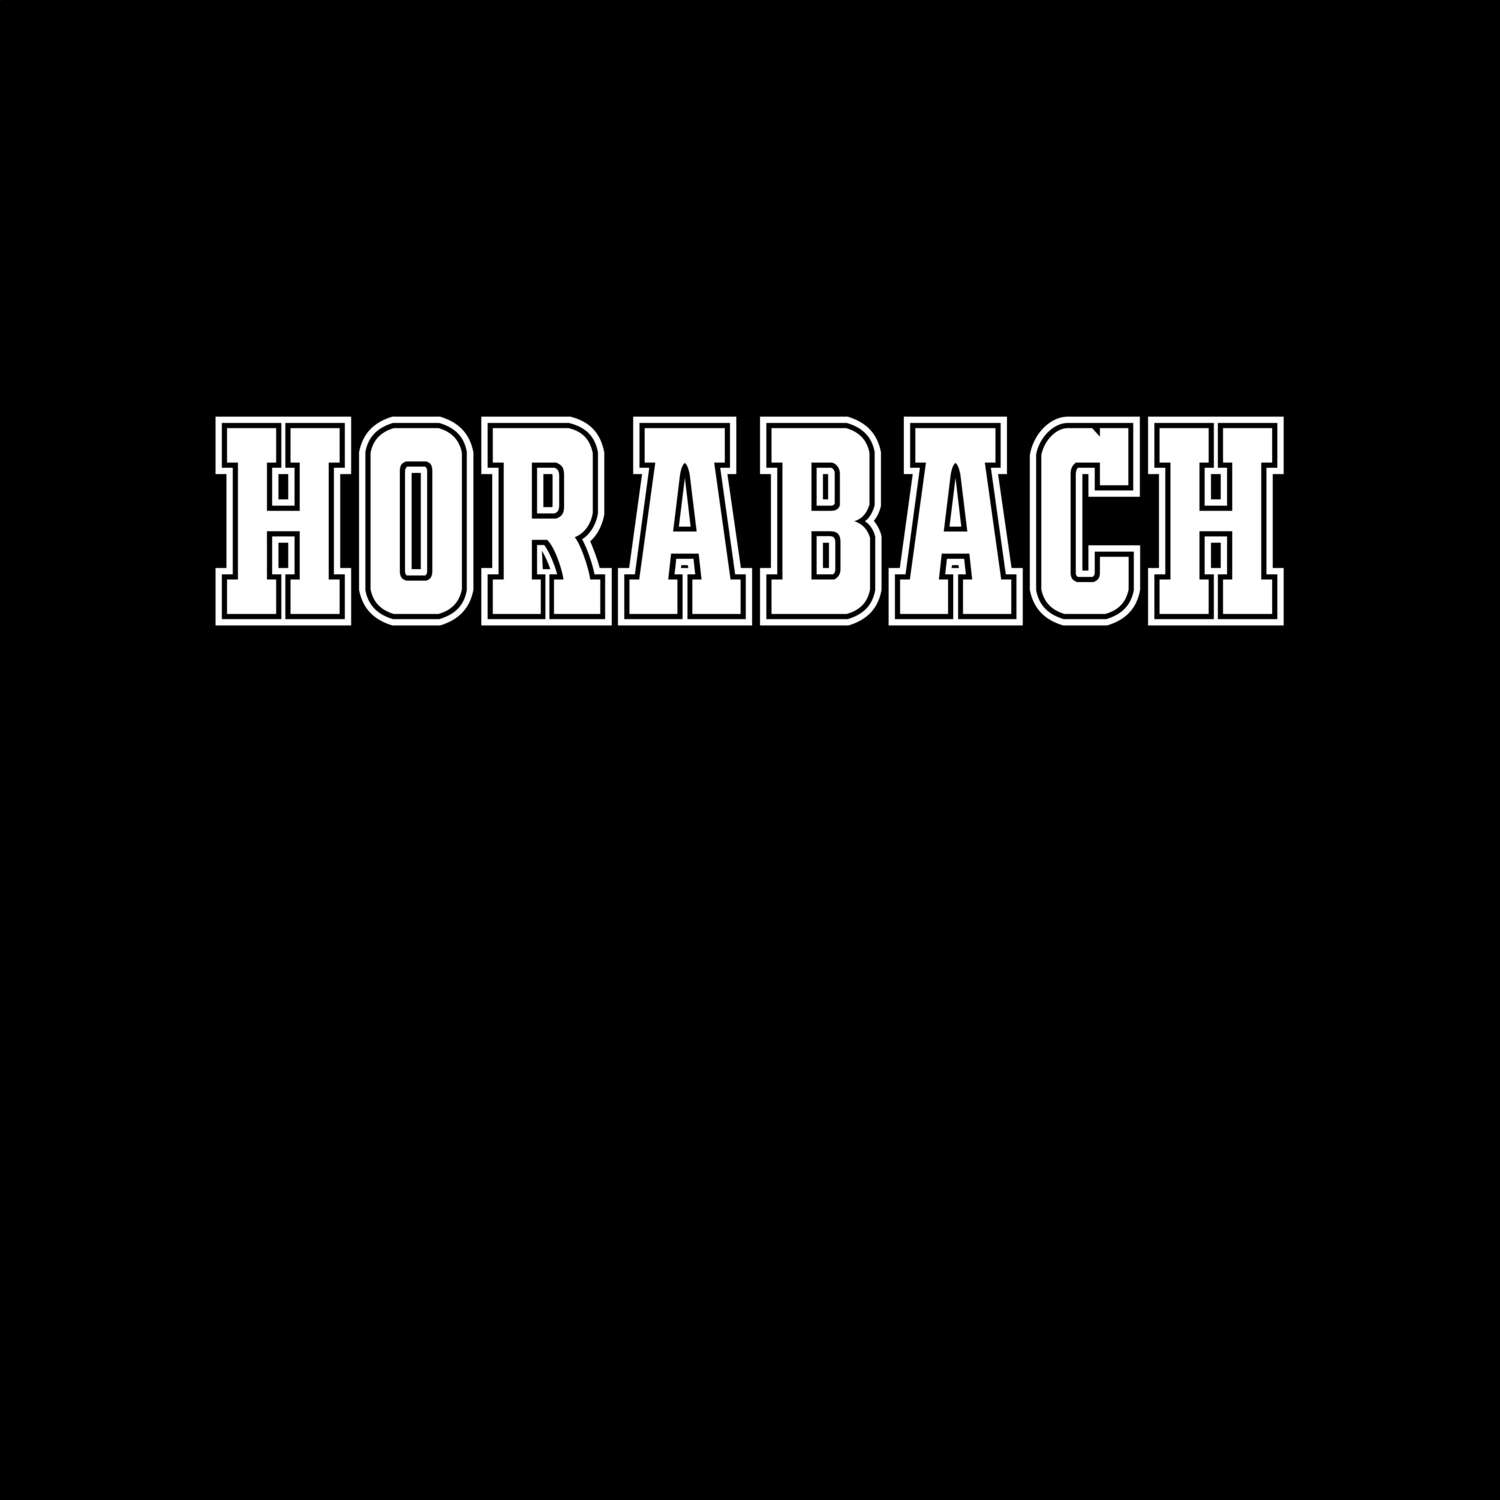 Horabach T-Shirt »Classic«